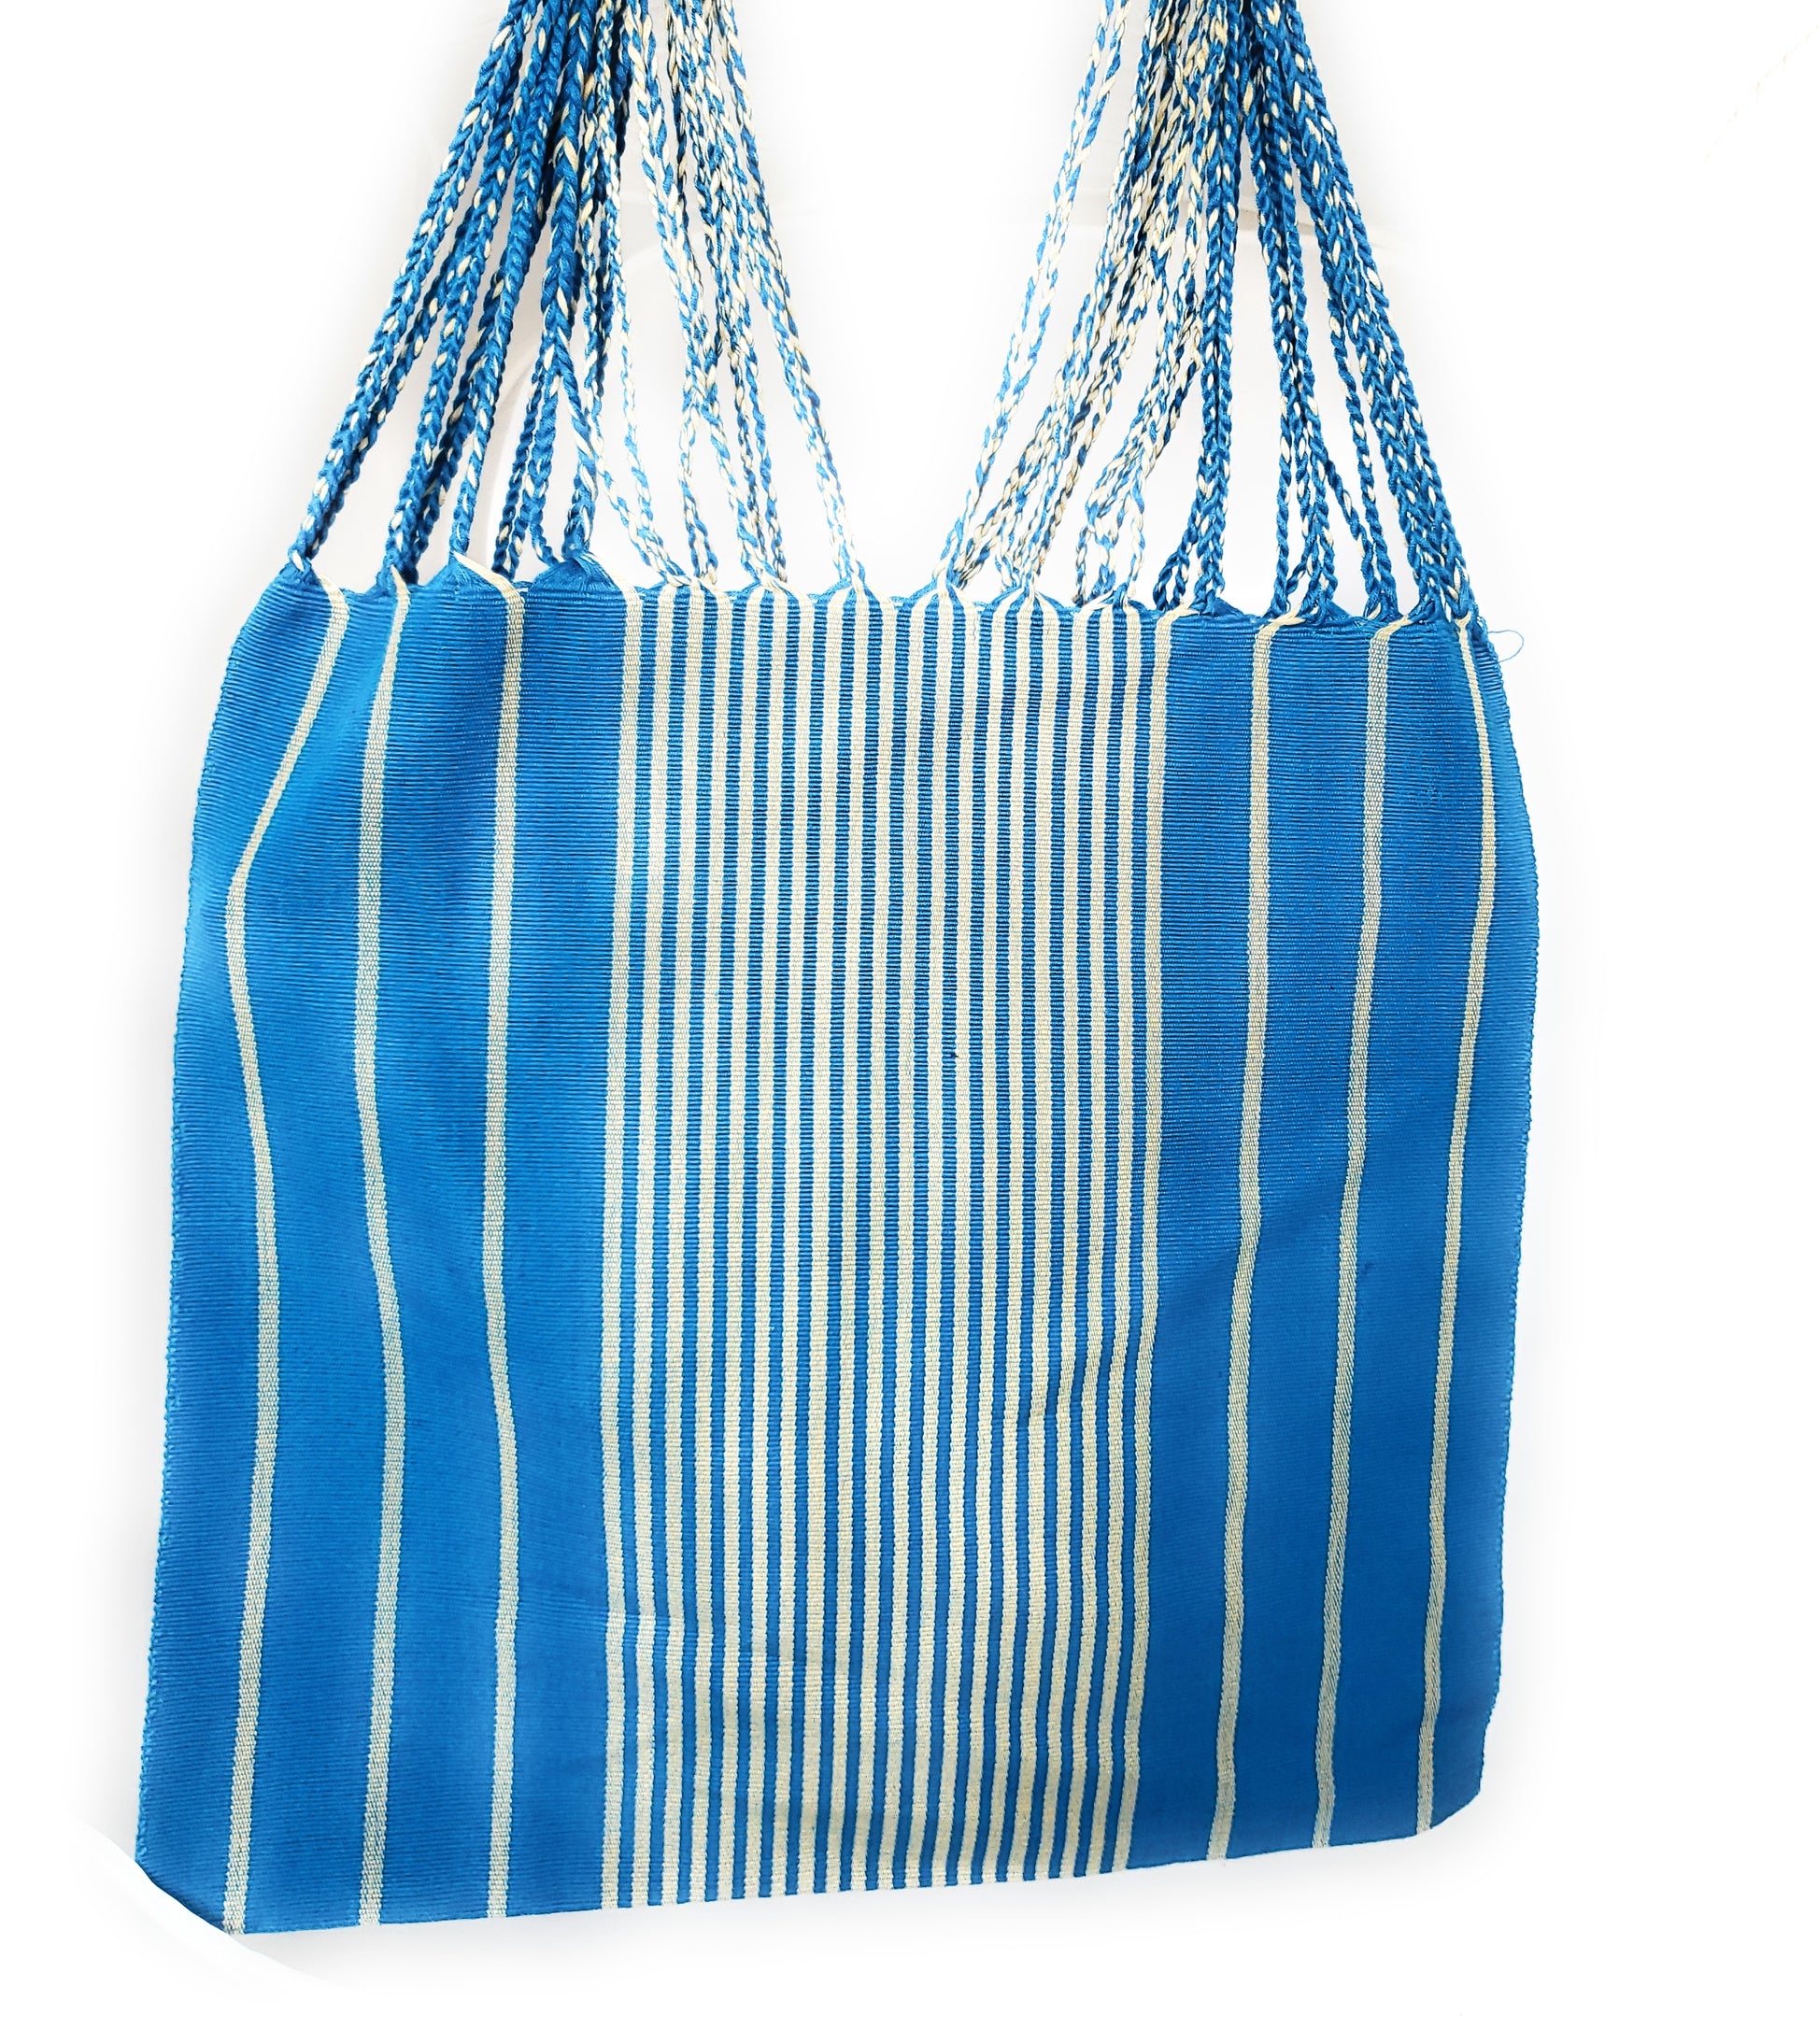 Fabric tote bag handwoven in Mexico, Valexico